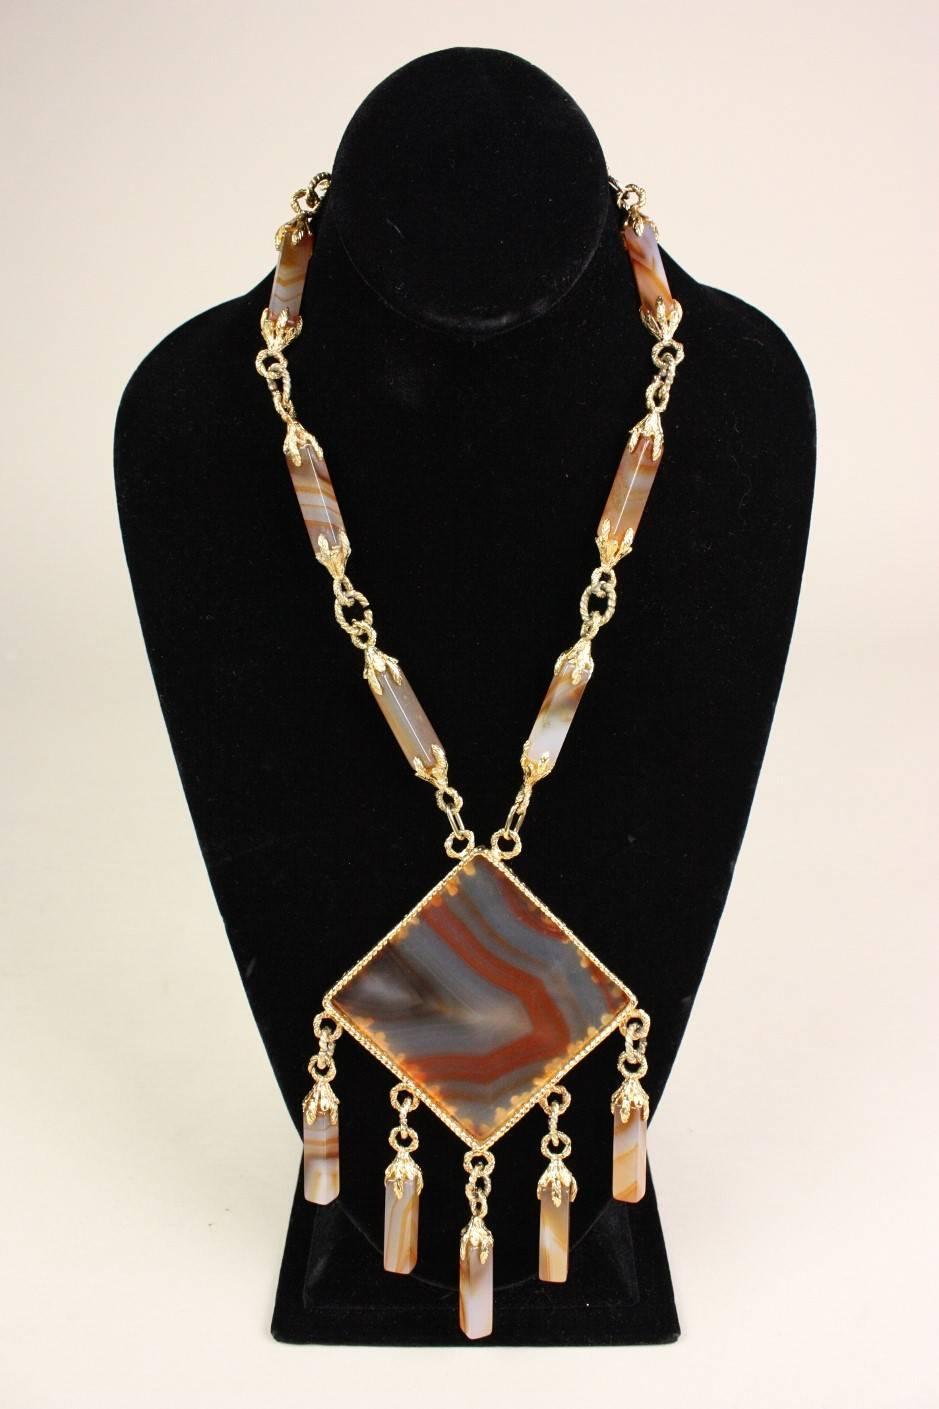 Vintage statement necklace dates to the 1970's and is made of gold-toned metal mixed with milky agate stones in varied neutral tones.  Long faceted agate beads are linked together.  Leaf motif in the metal.  Clasp is marked 